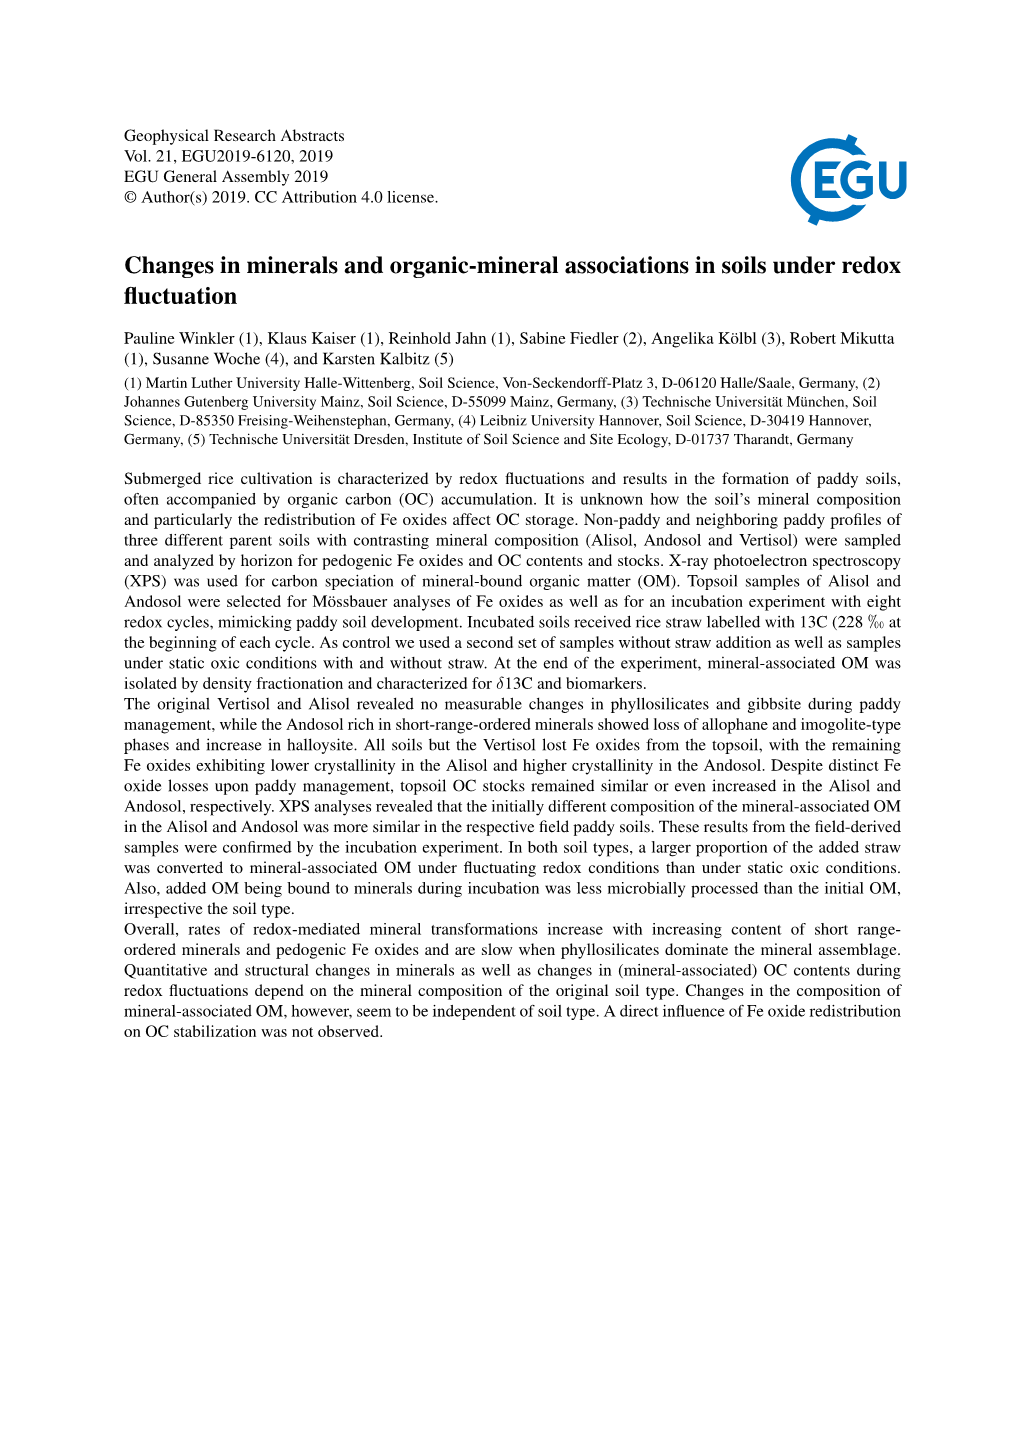 Changes in Minerals and Organic-Mineral Associations in Soils Under Redox ﬂuctuation